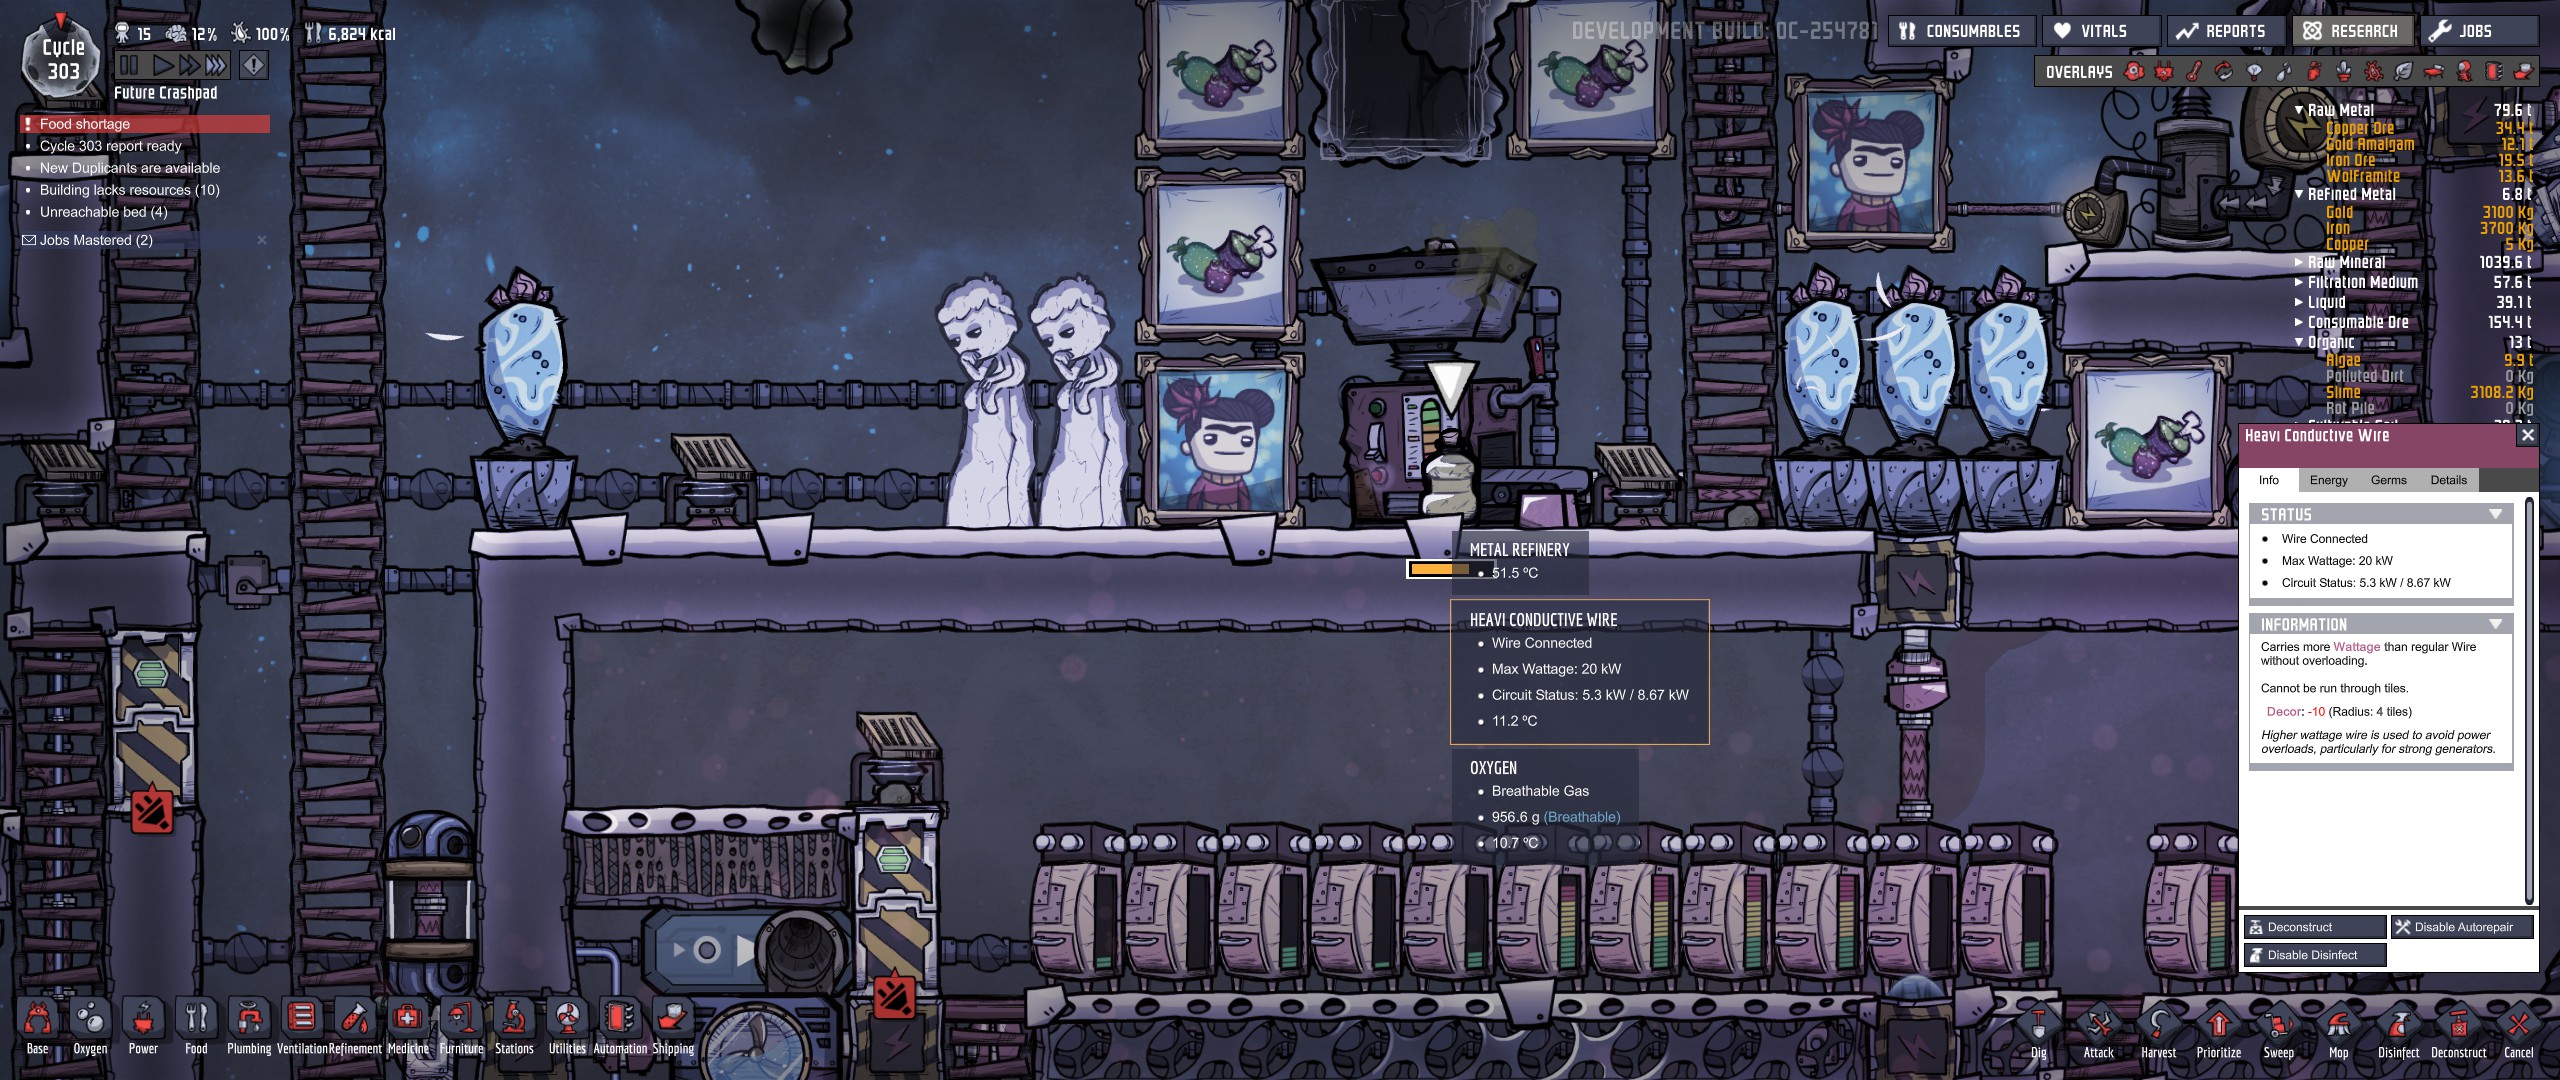 oxygen not included save file download